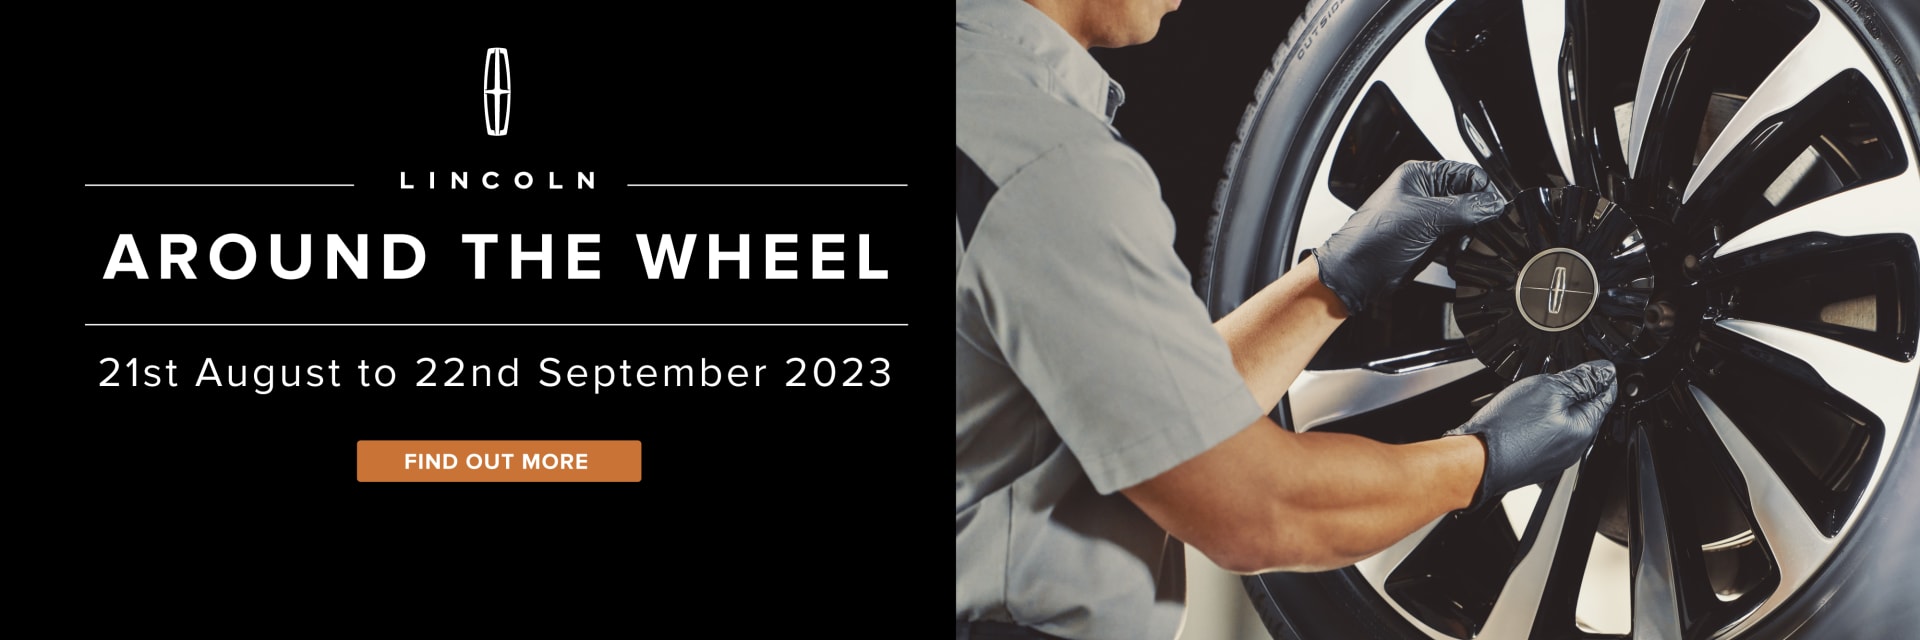 Lincoln Around the wheel Offer